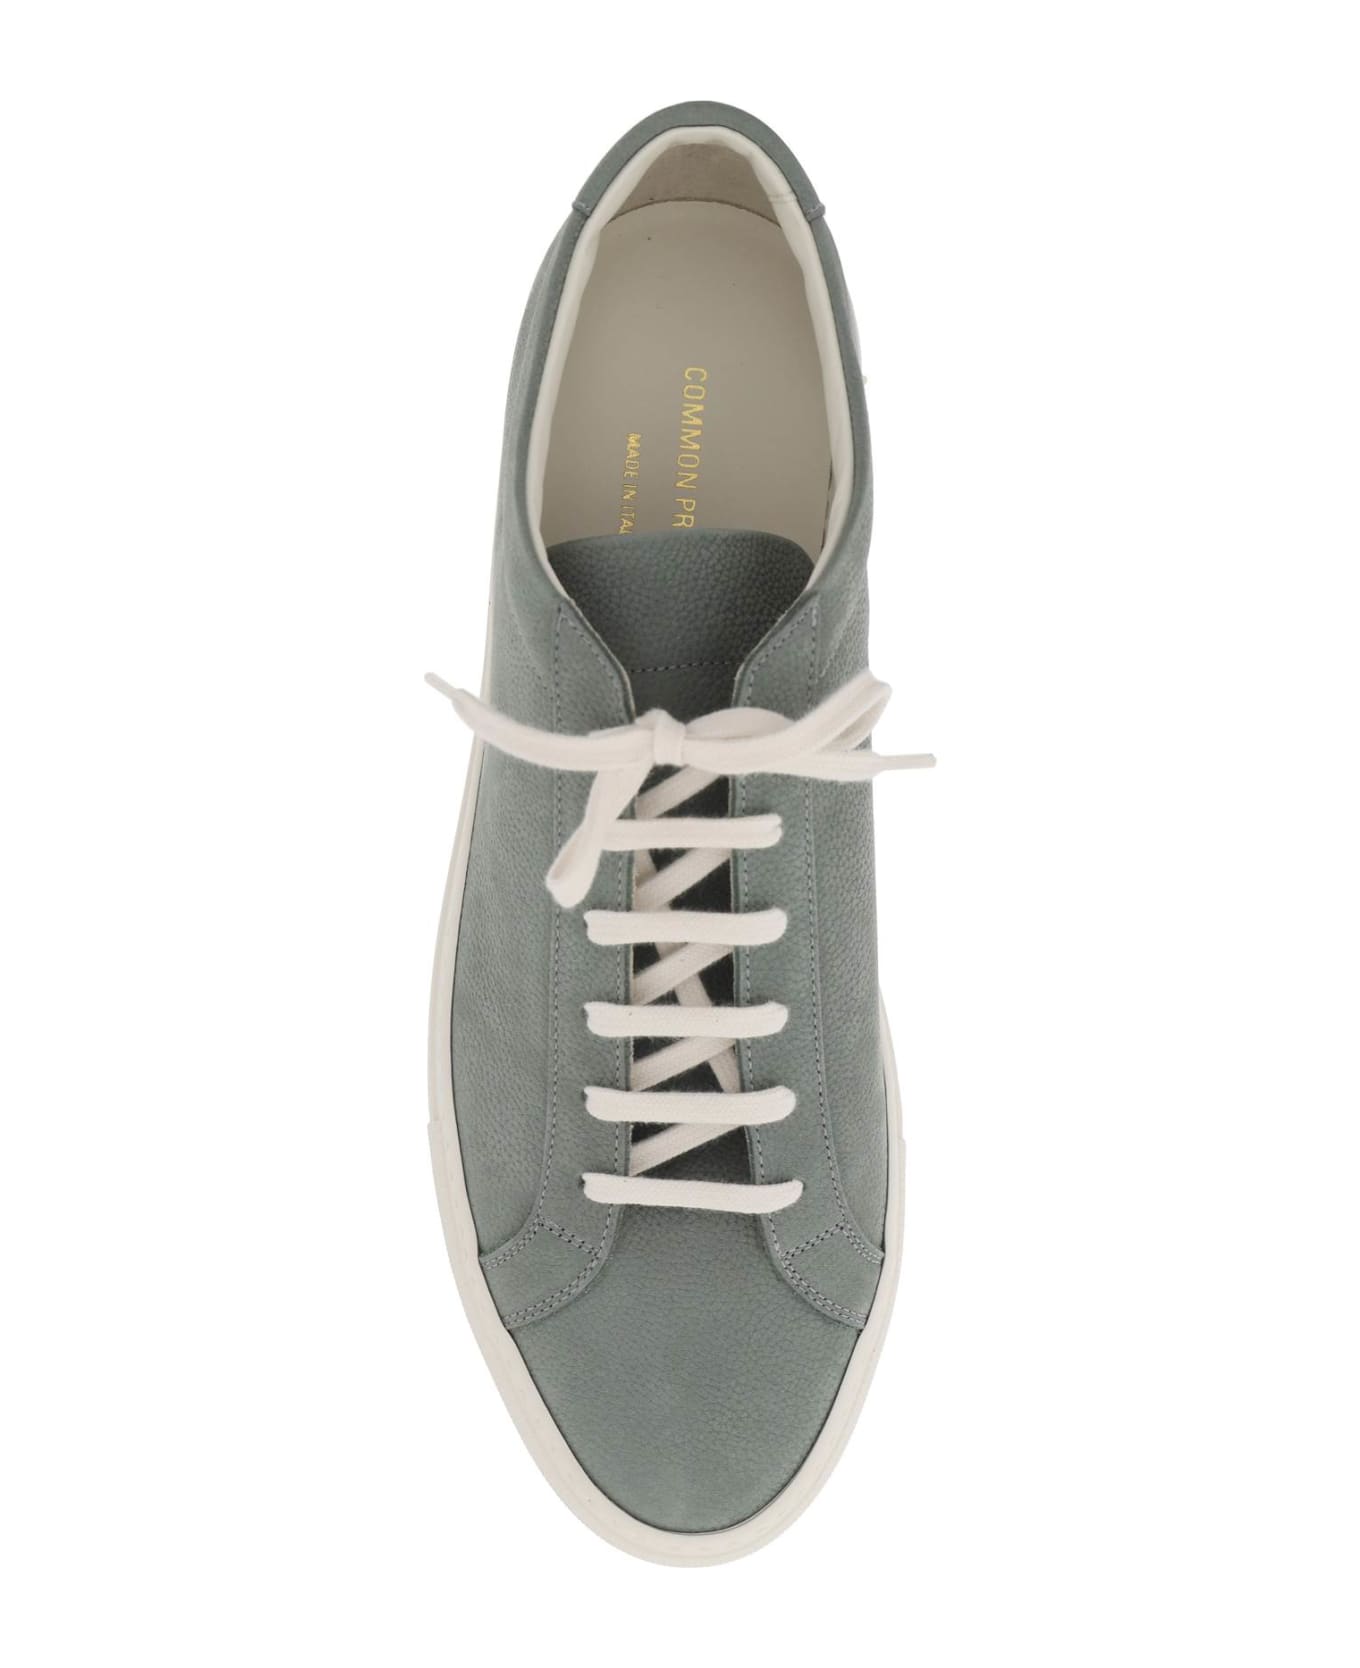 Common Projects Original Achilles Leather Sneakers - SAGE (Green)